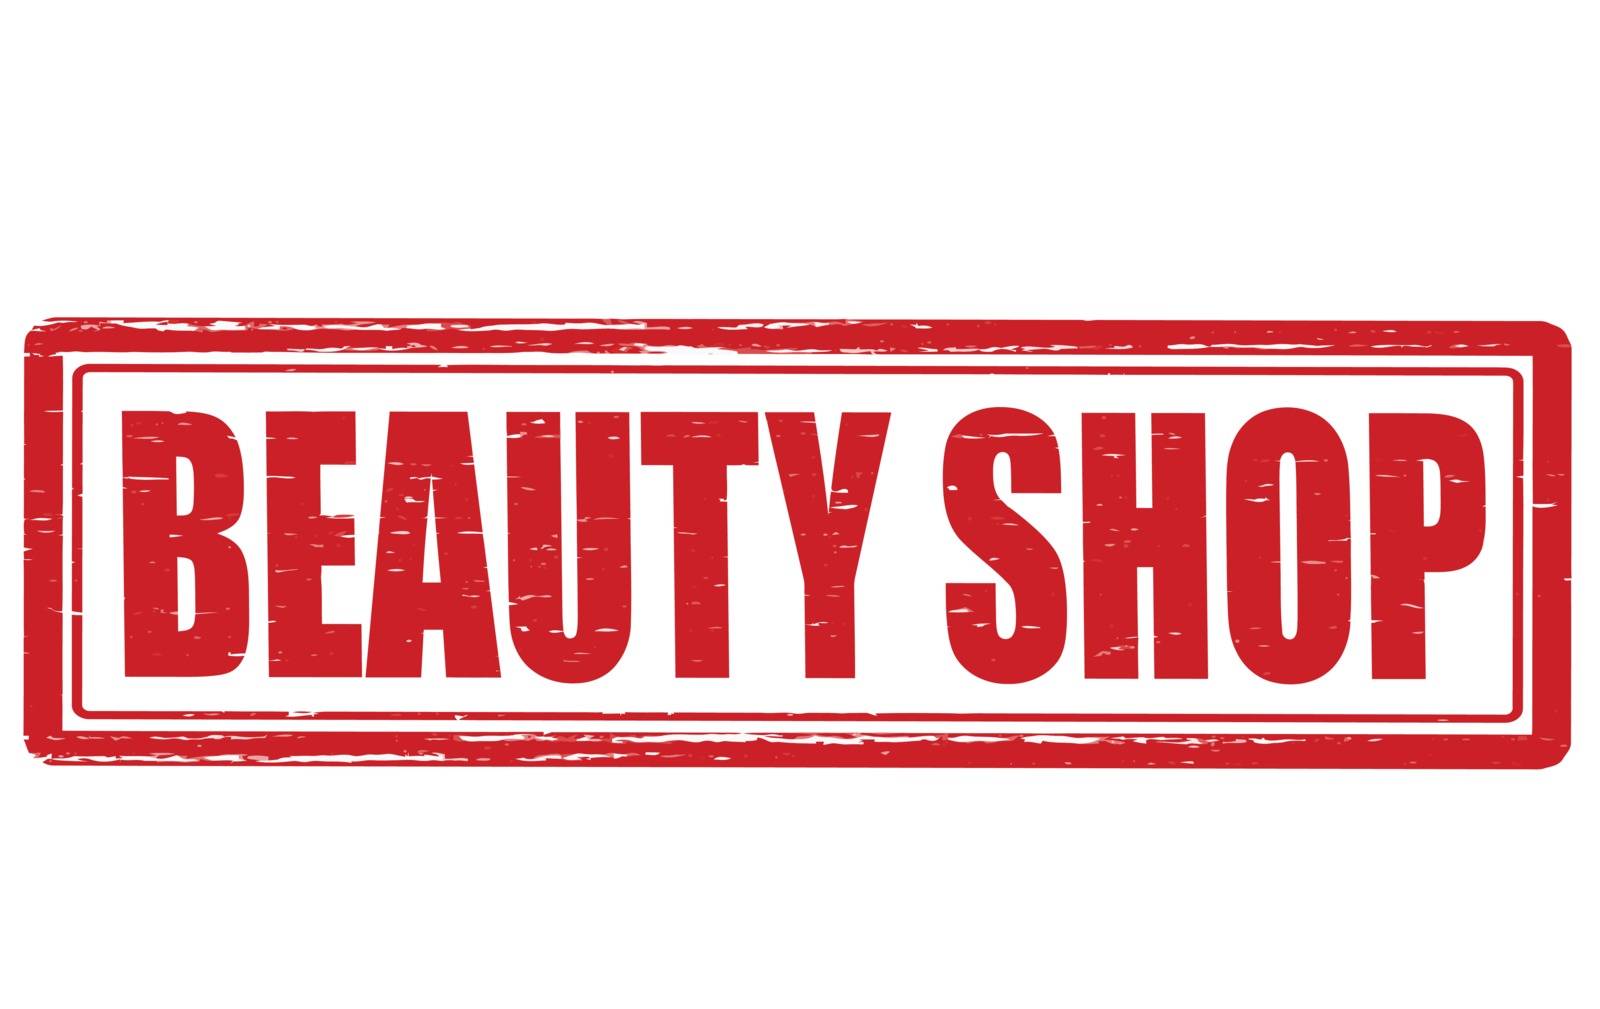 Stamp with text beautz shop inside, vector illustration